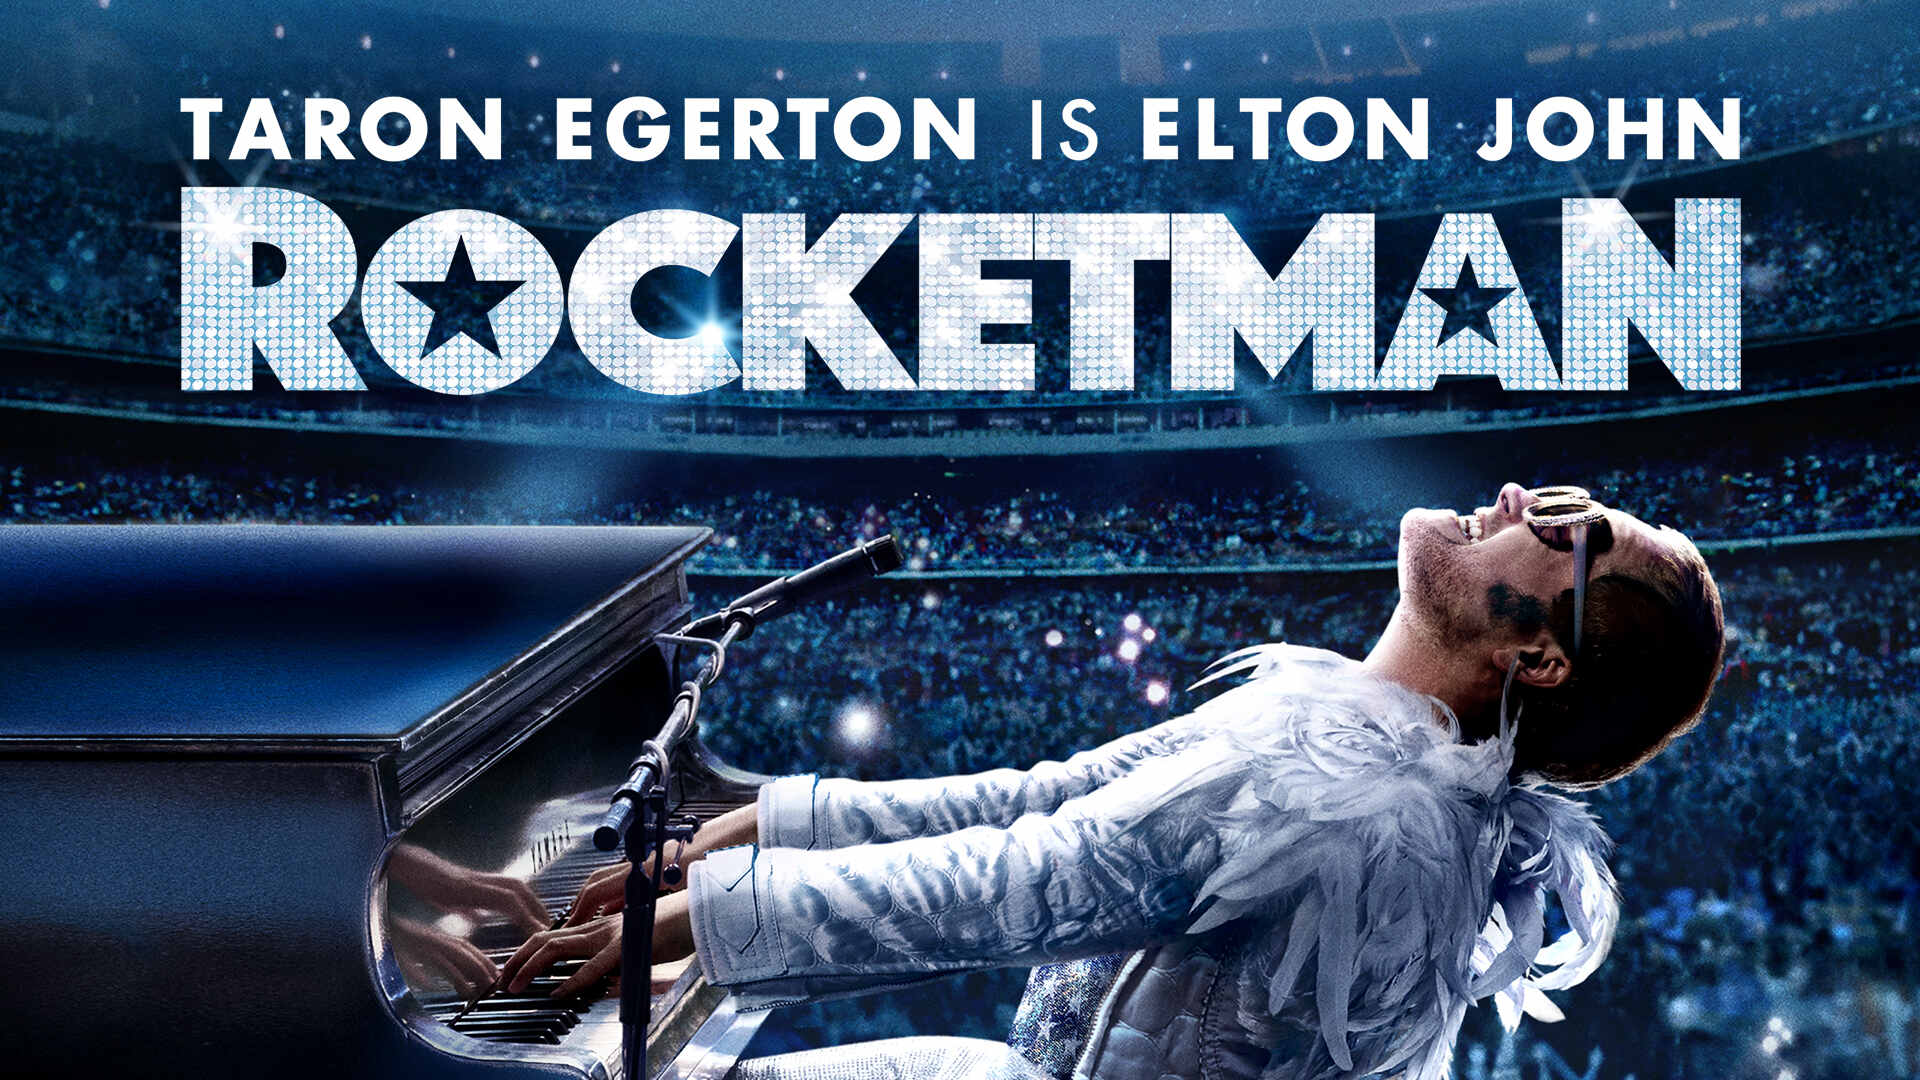 44-facts-about-the-movie-rocketman